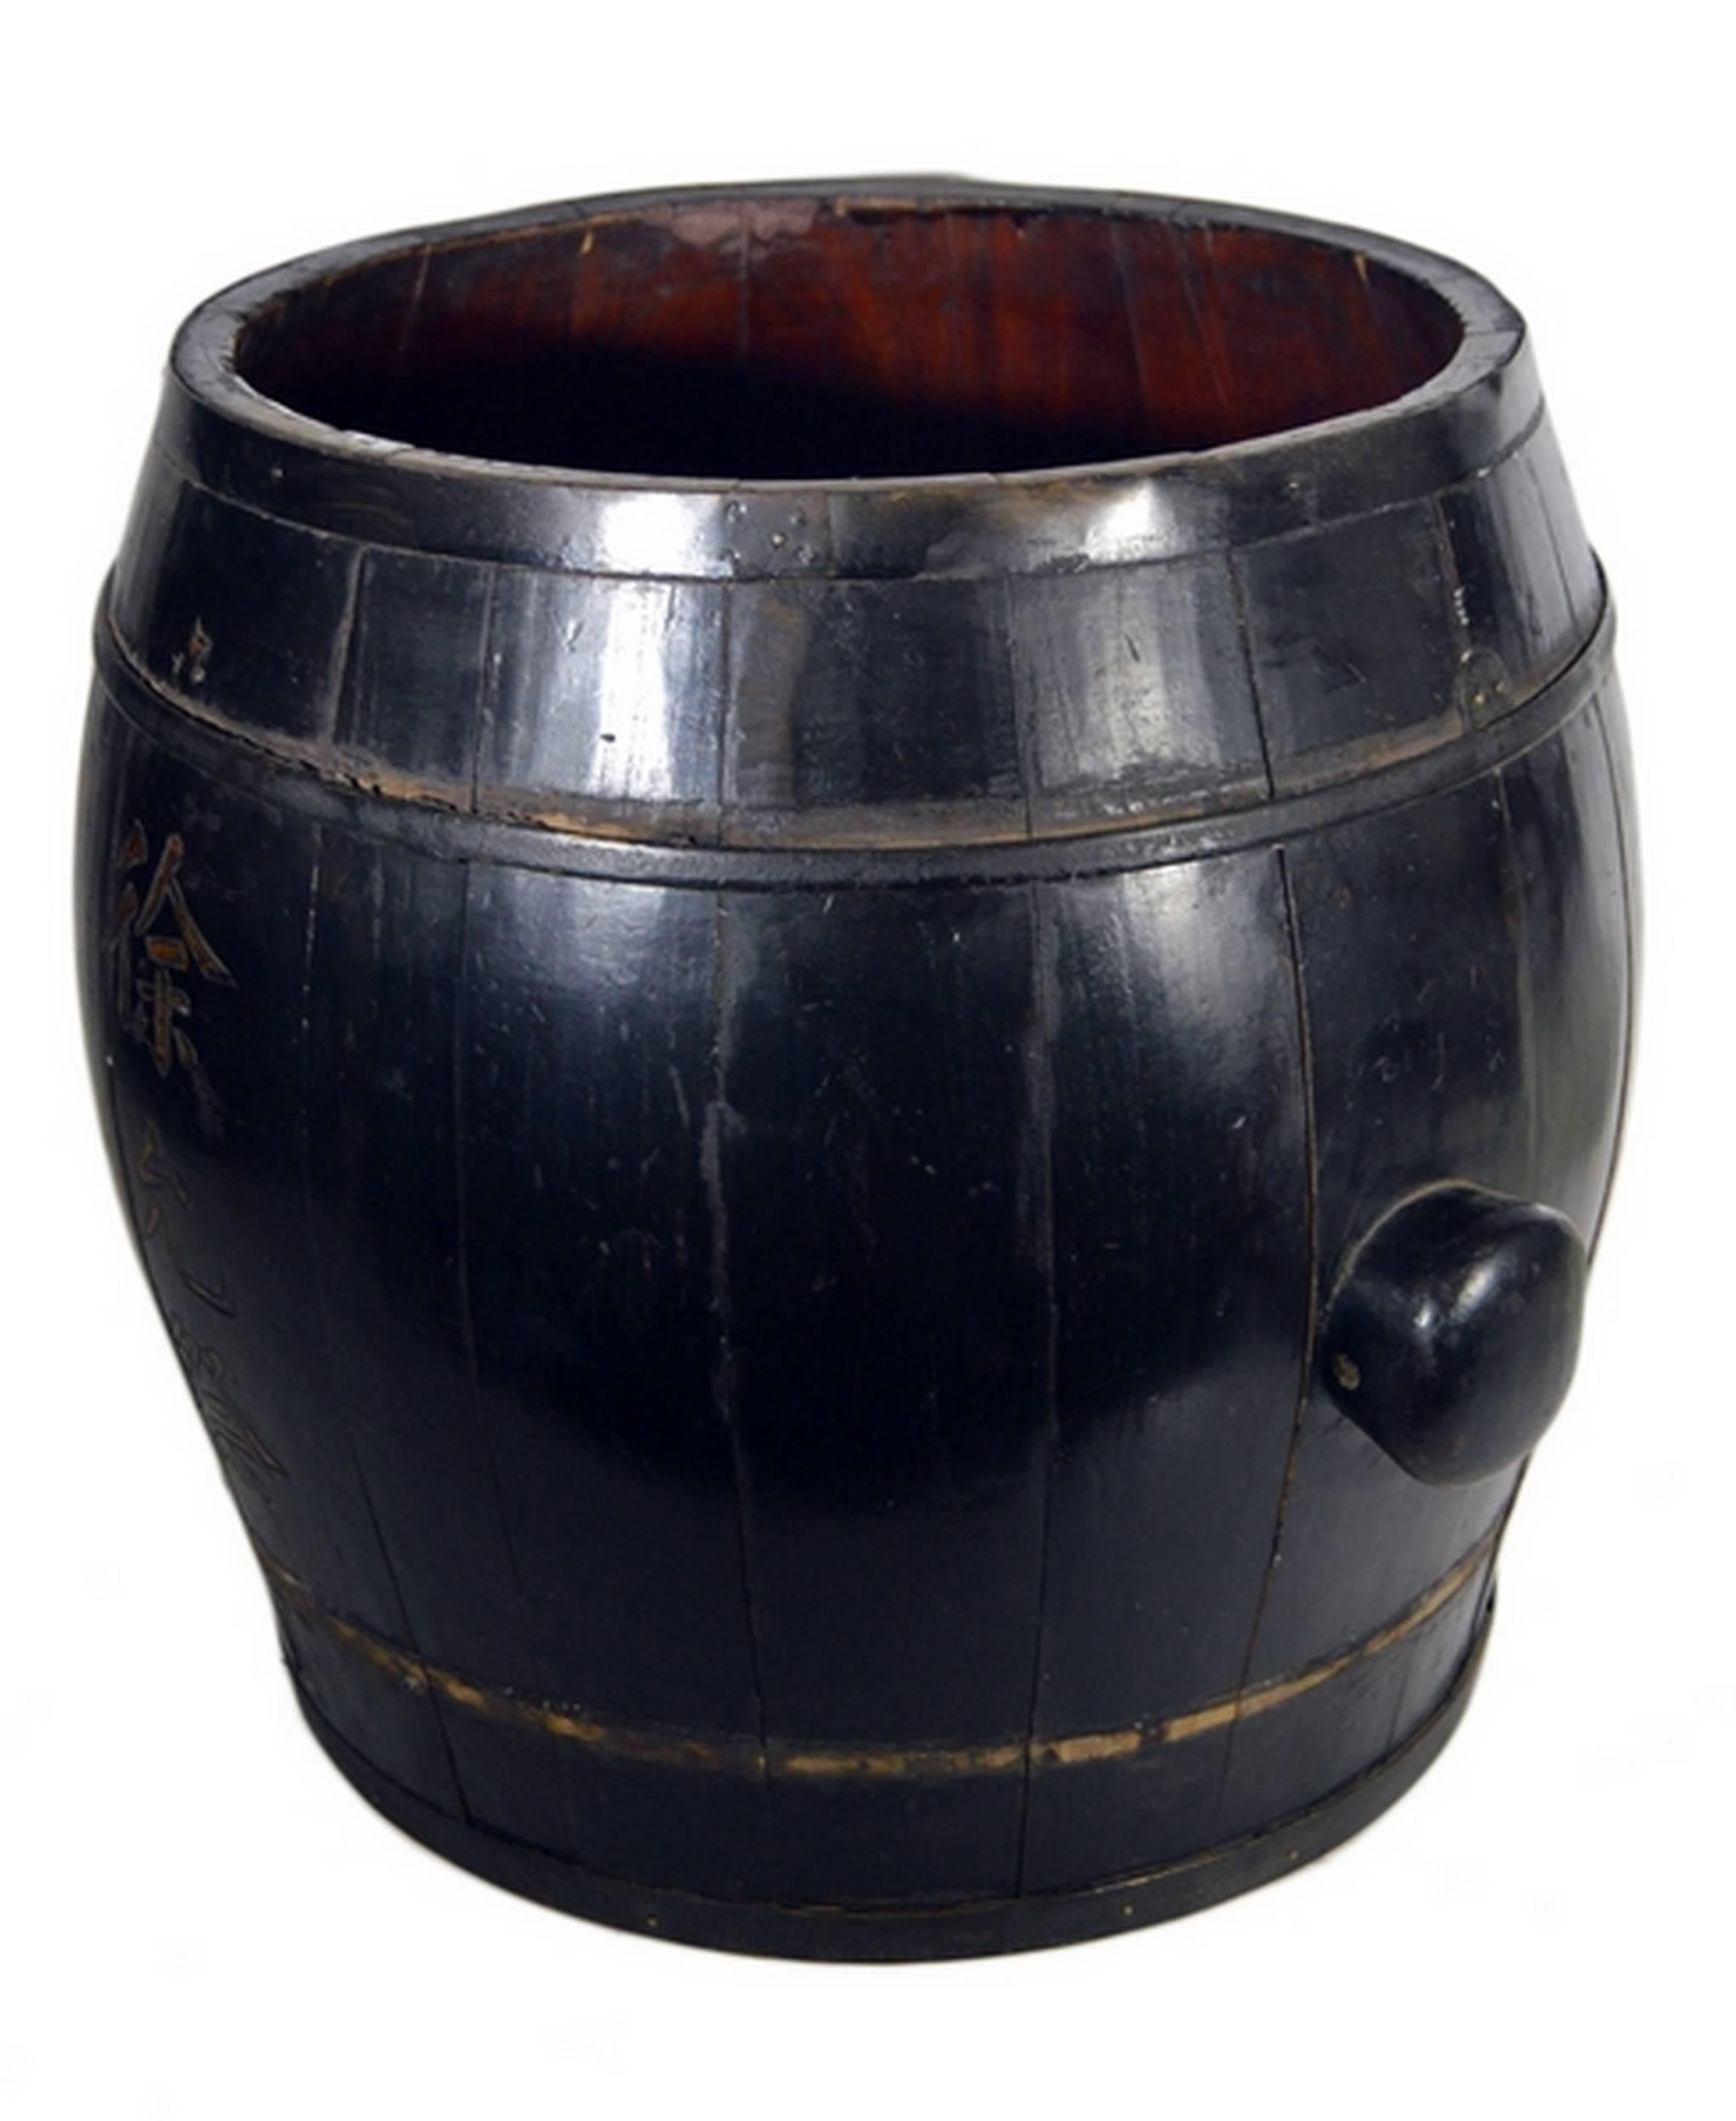 A 19th century Chinese grain barrel / basket with calligraphy on the sides. This round barrel is made with black lacquered wood planks and features two round knobs on the sides for lifting. The basket is adorned with two  calligraphy columns,